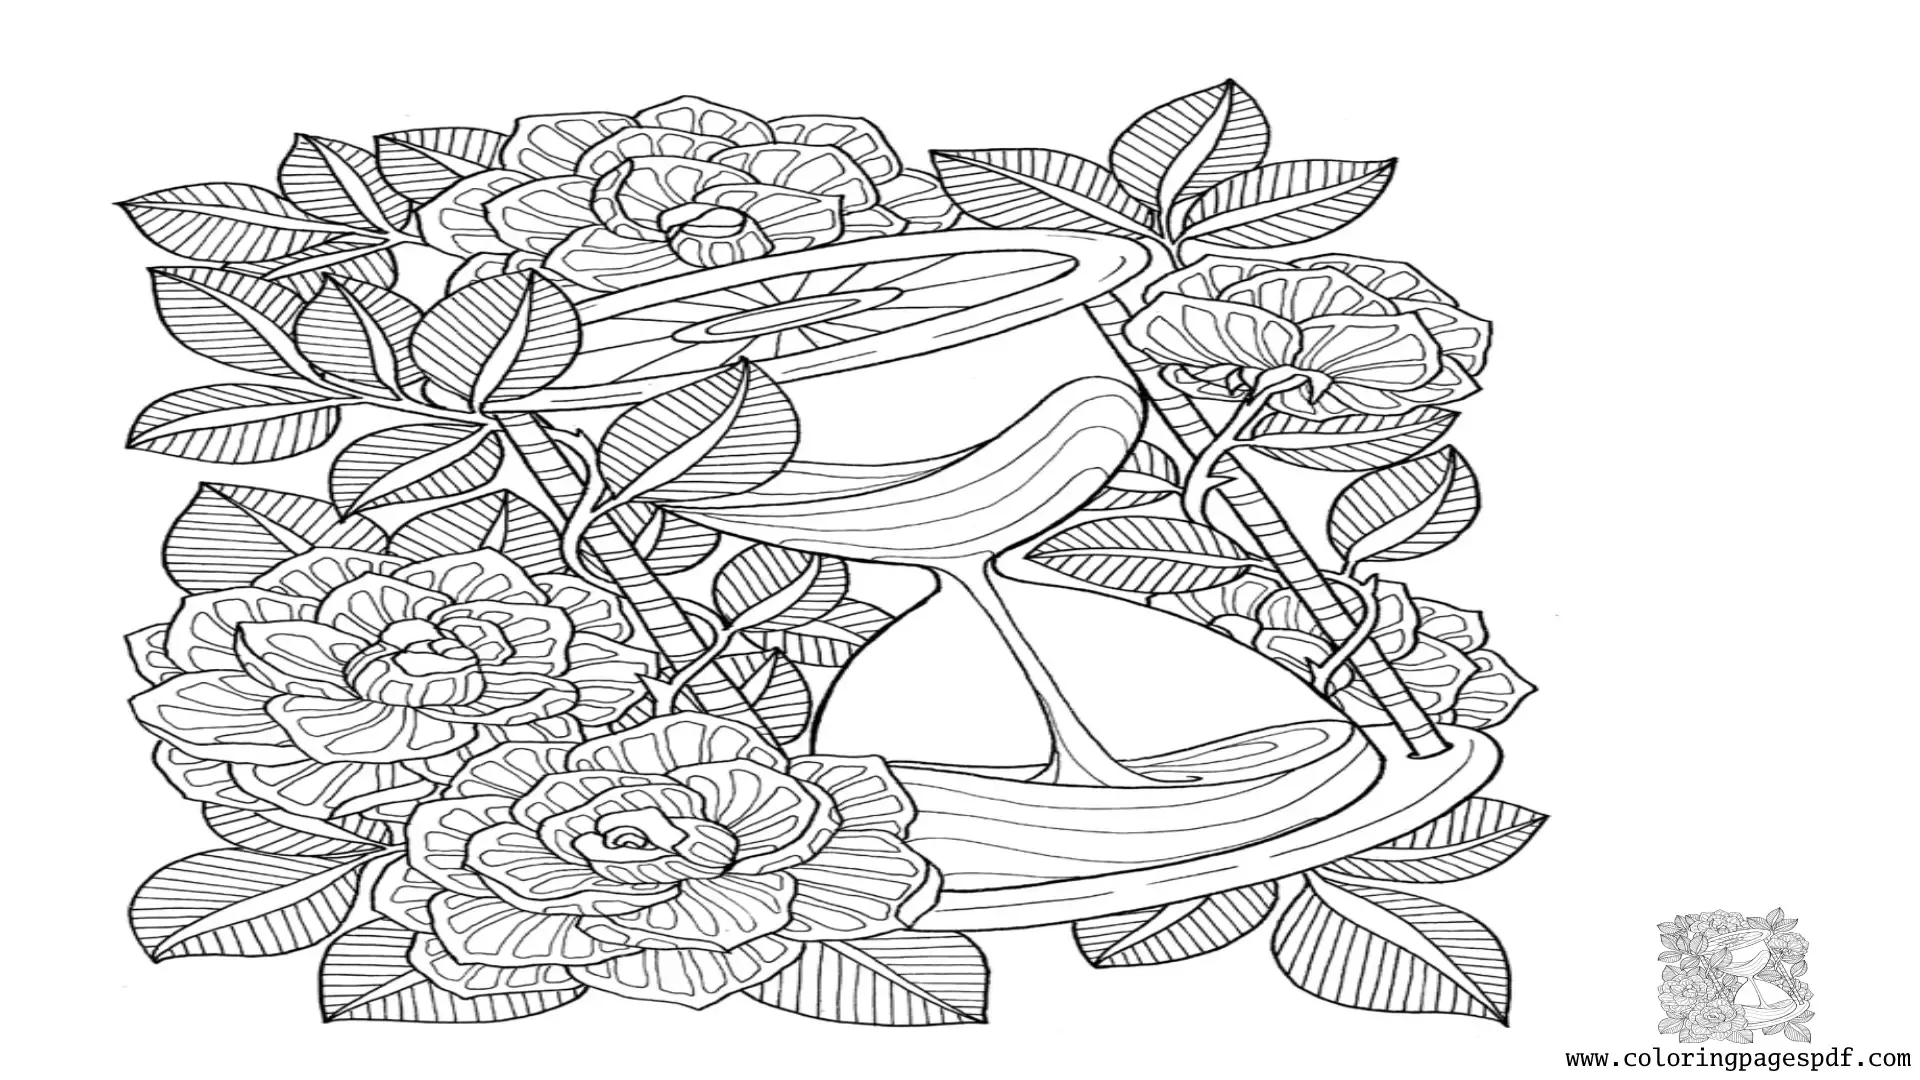 Coloring Page Of Flowers Surrounding An Hourglass